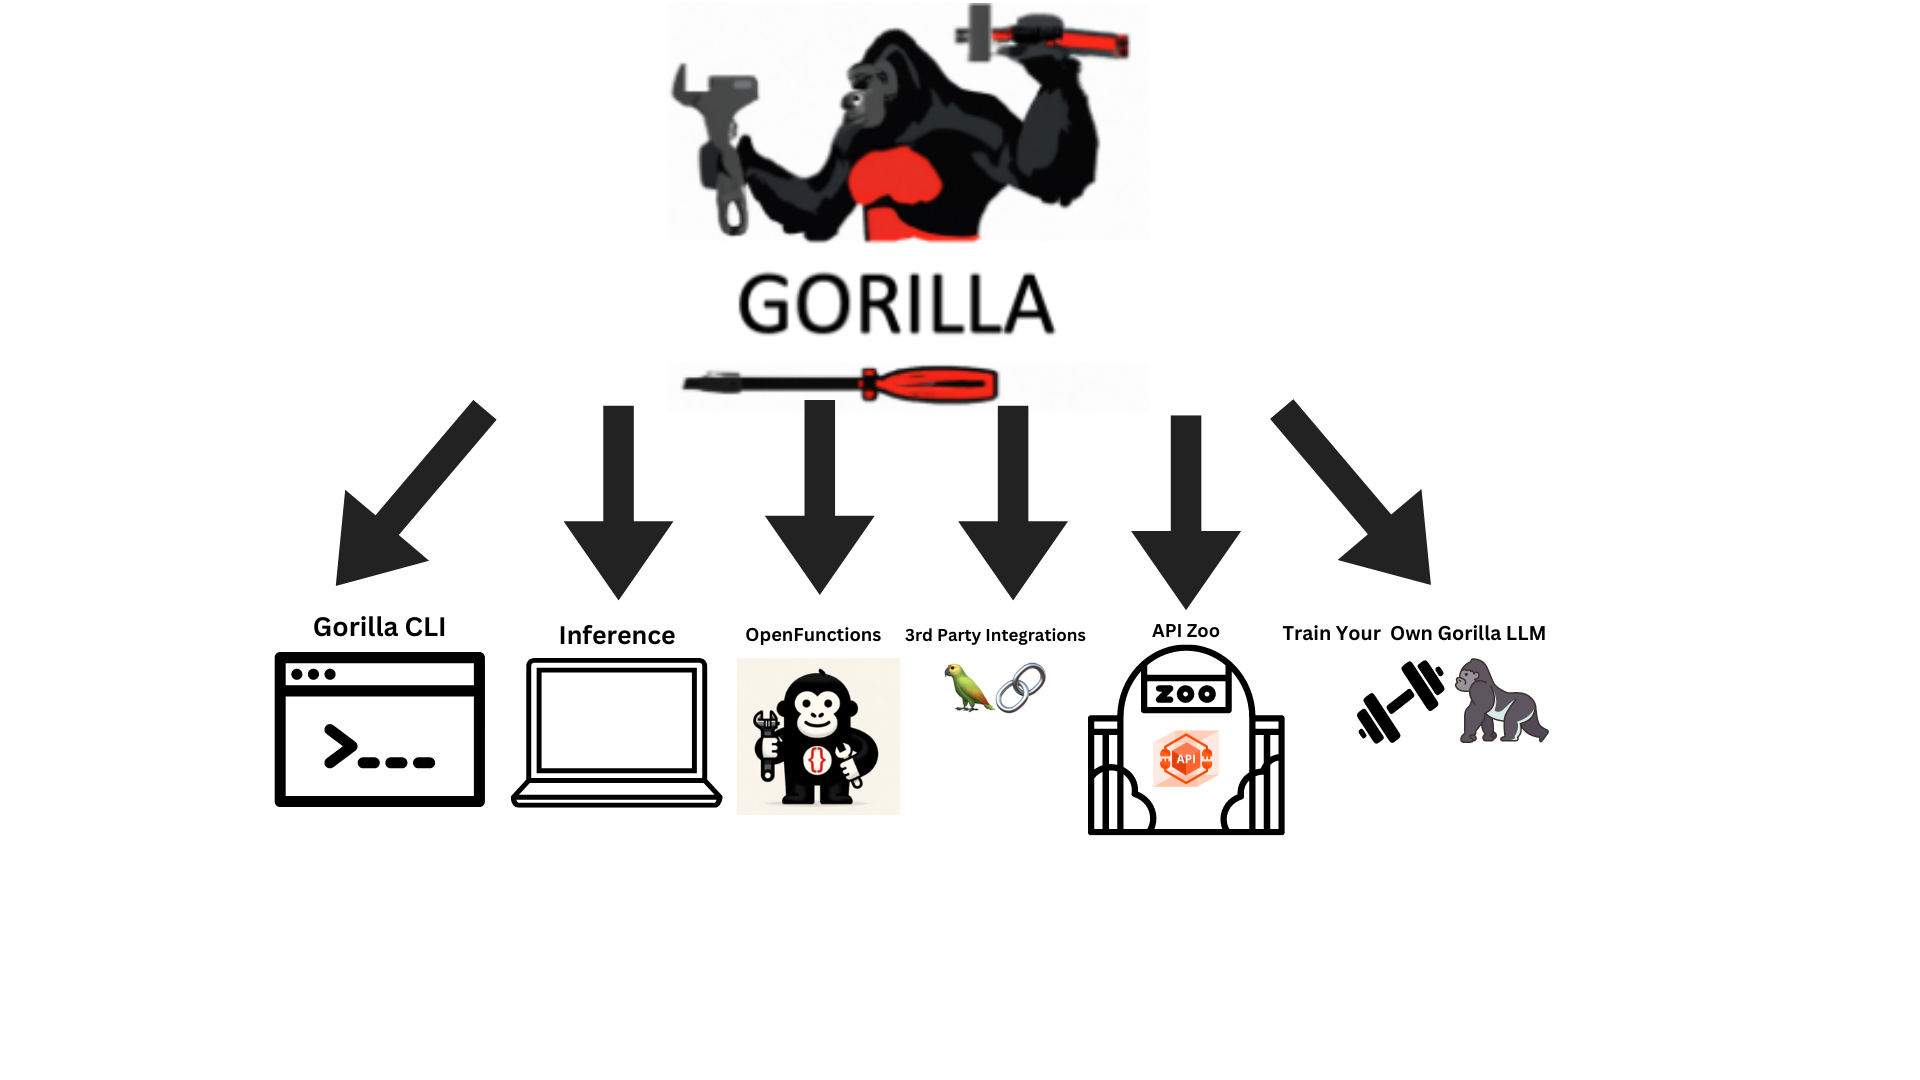 How to Use Gorilla Image